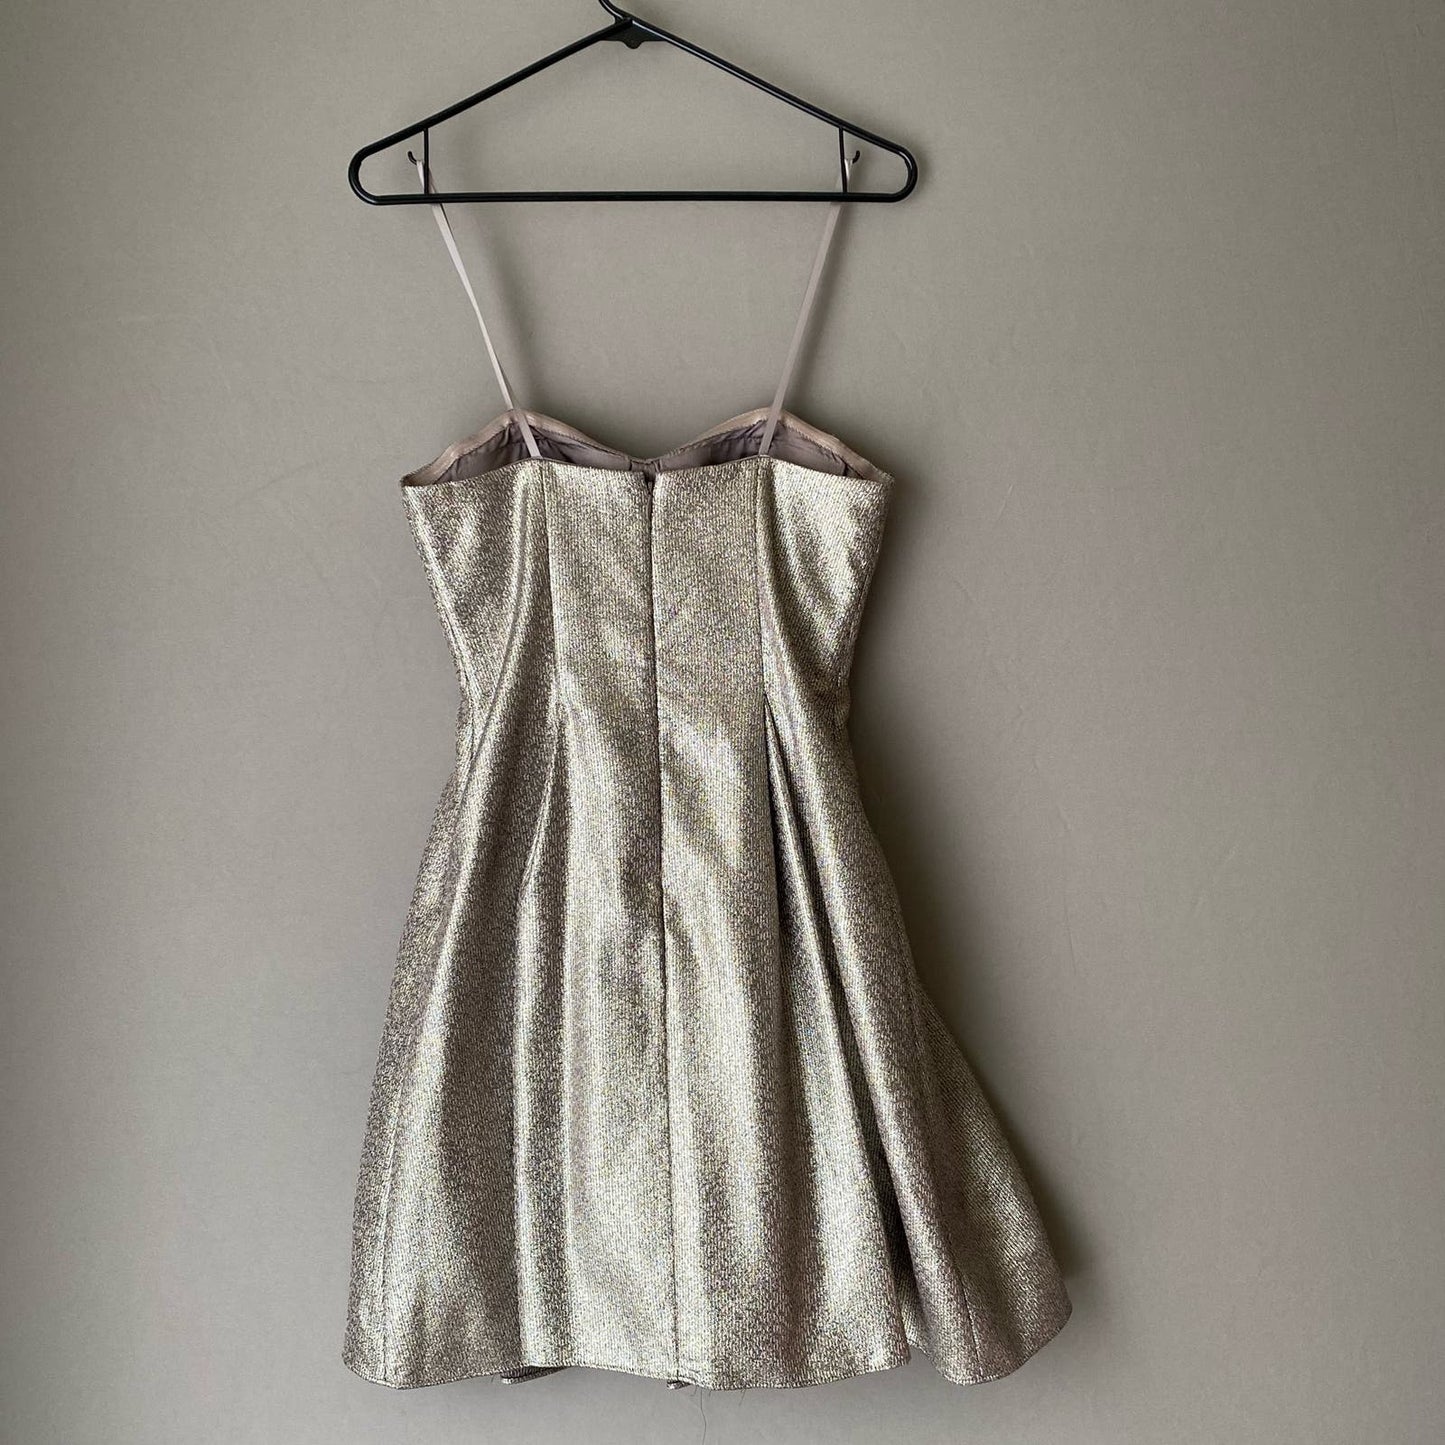 Adrianna Papell size 4 strapless fit & flare metallic party dress